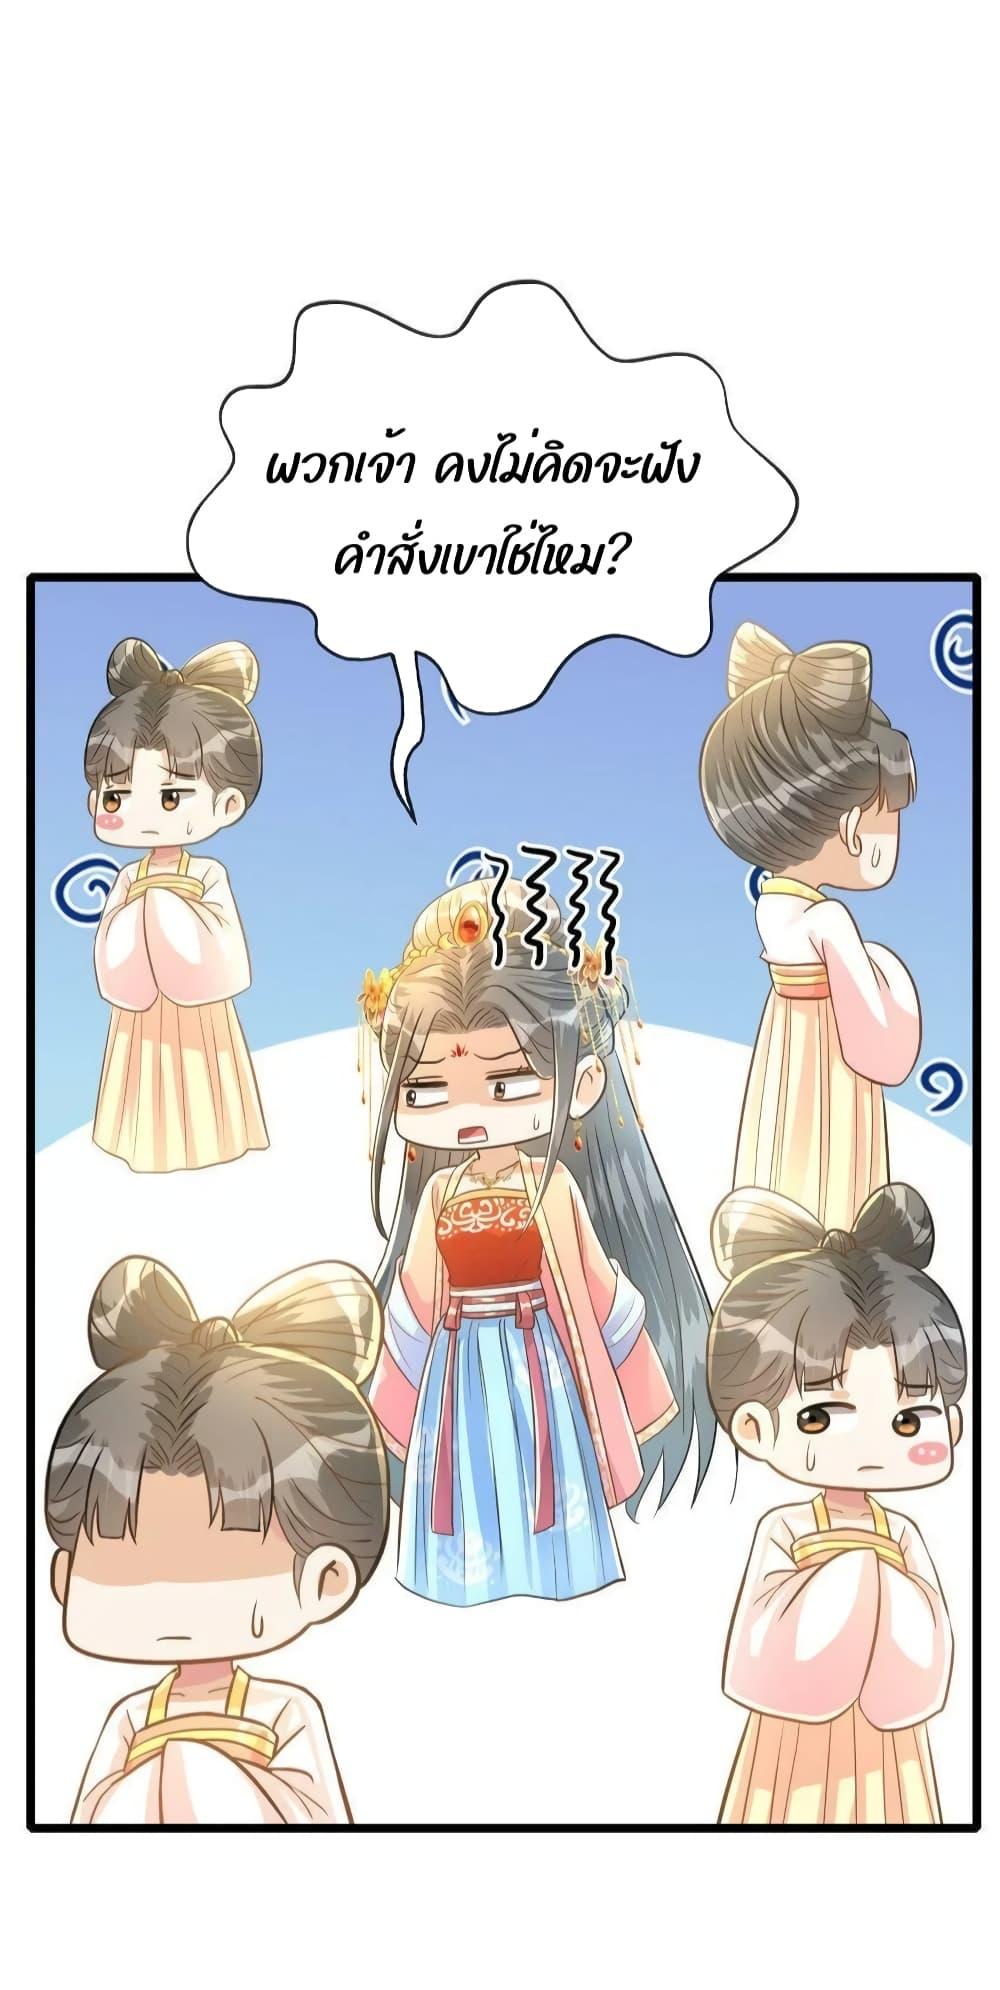 But what if His Royal Highness is the substitute โ€“ เธซเธฒเธเน€เธเธฒเน€เธเนเธเนเธเนเธ•เธฑเธงเนเธ—เธเธญเธเธเนเธฃเธฑเธเธ—เธฒเธขเธฒเธ—เธฅเนเธฐ เธ•เธญเธเธ—เธตเน 13 (17)